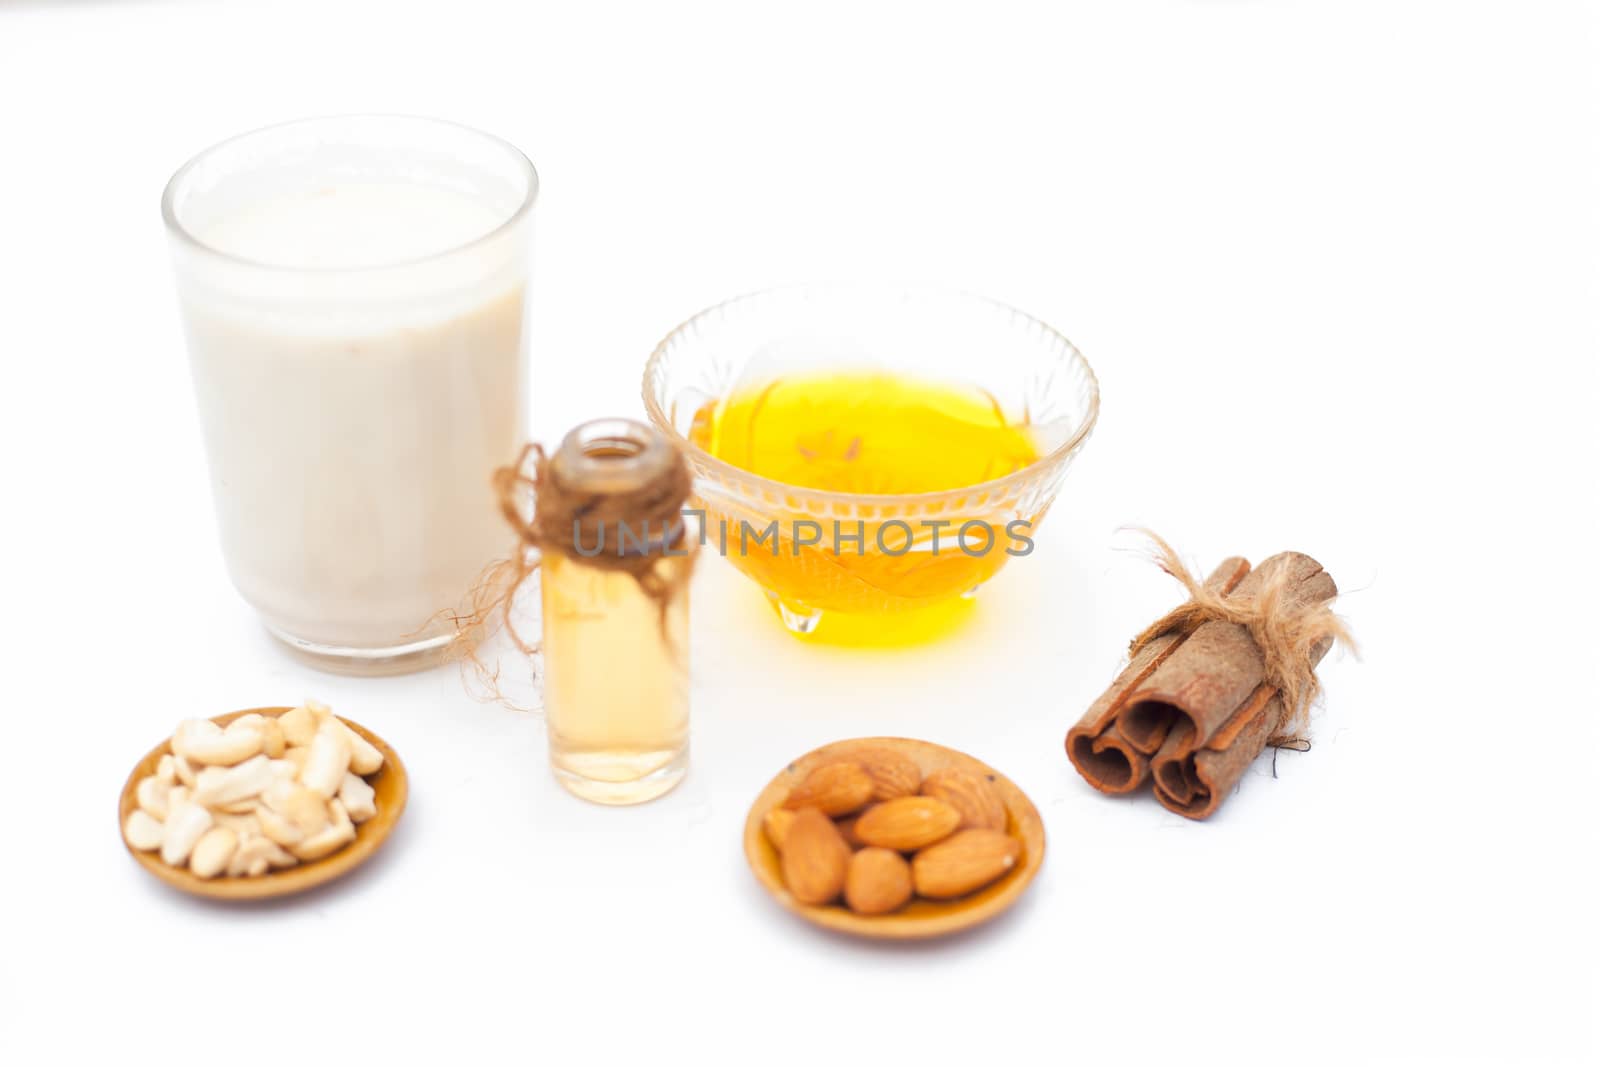 Close up of popular Indian &amp; Asian winter drink isolated on white i.e Honey milk or shahad ka dudh in a transparent glass with entire ingredients which are milk,honey, and dry fruits.